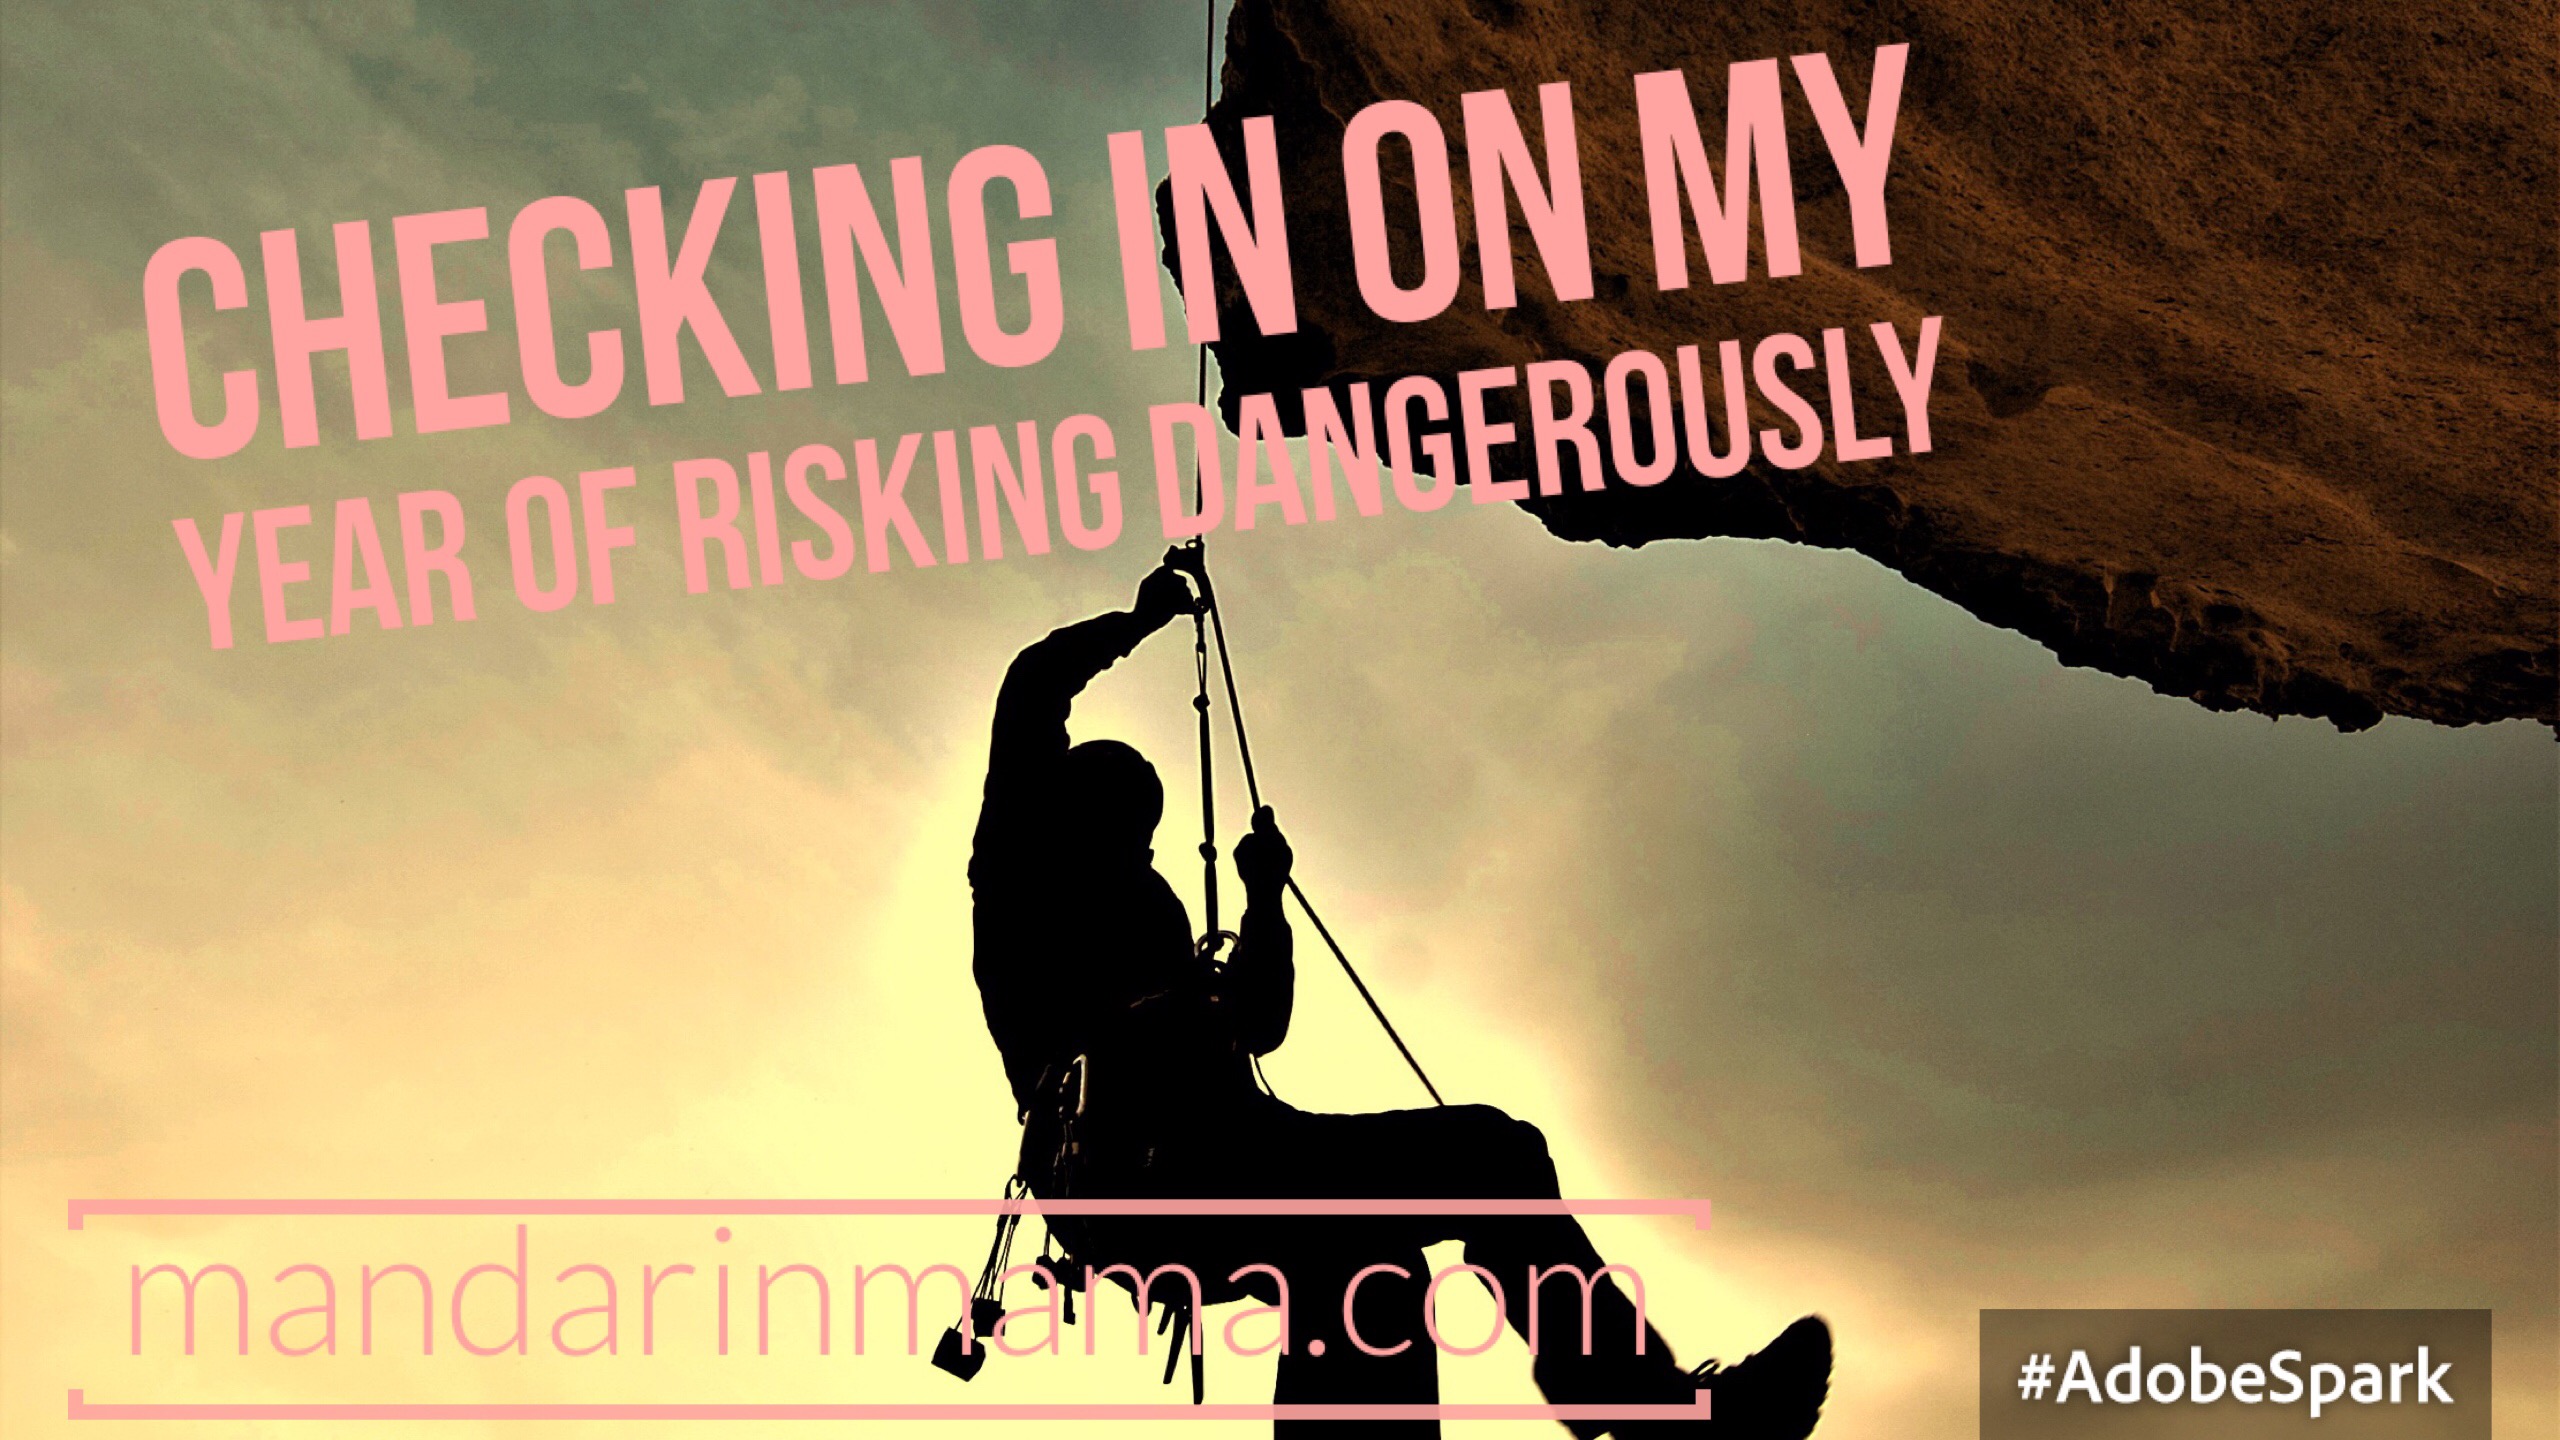 Checking In on My Year of Risking Dangerously